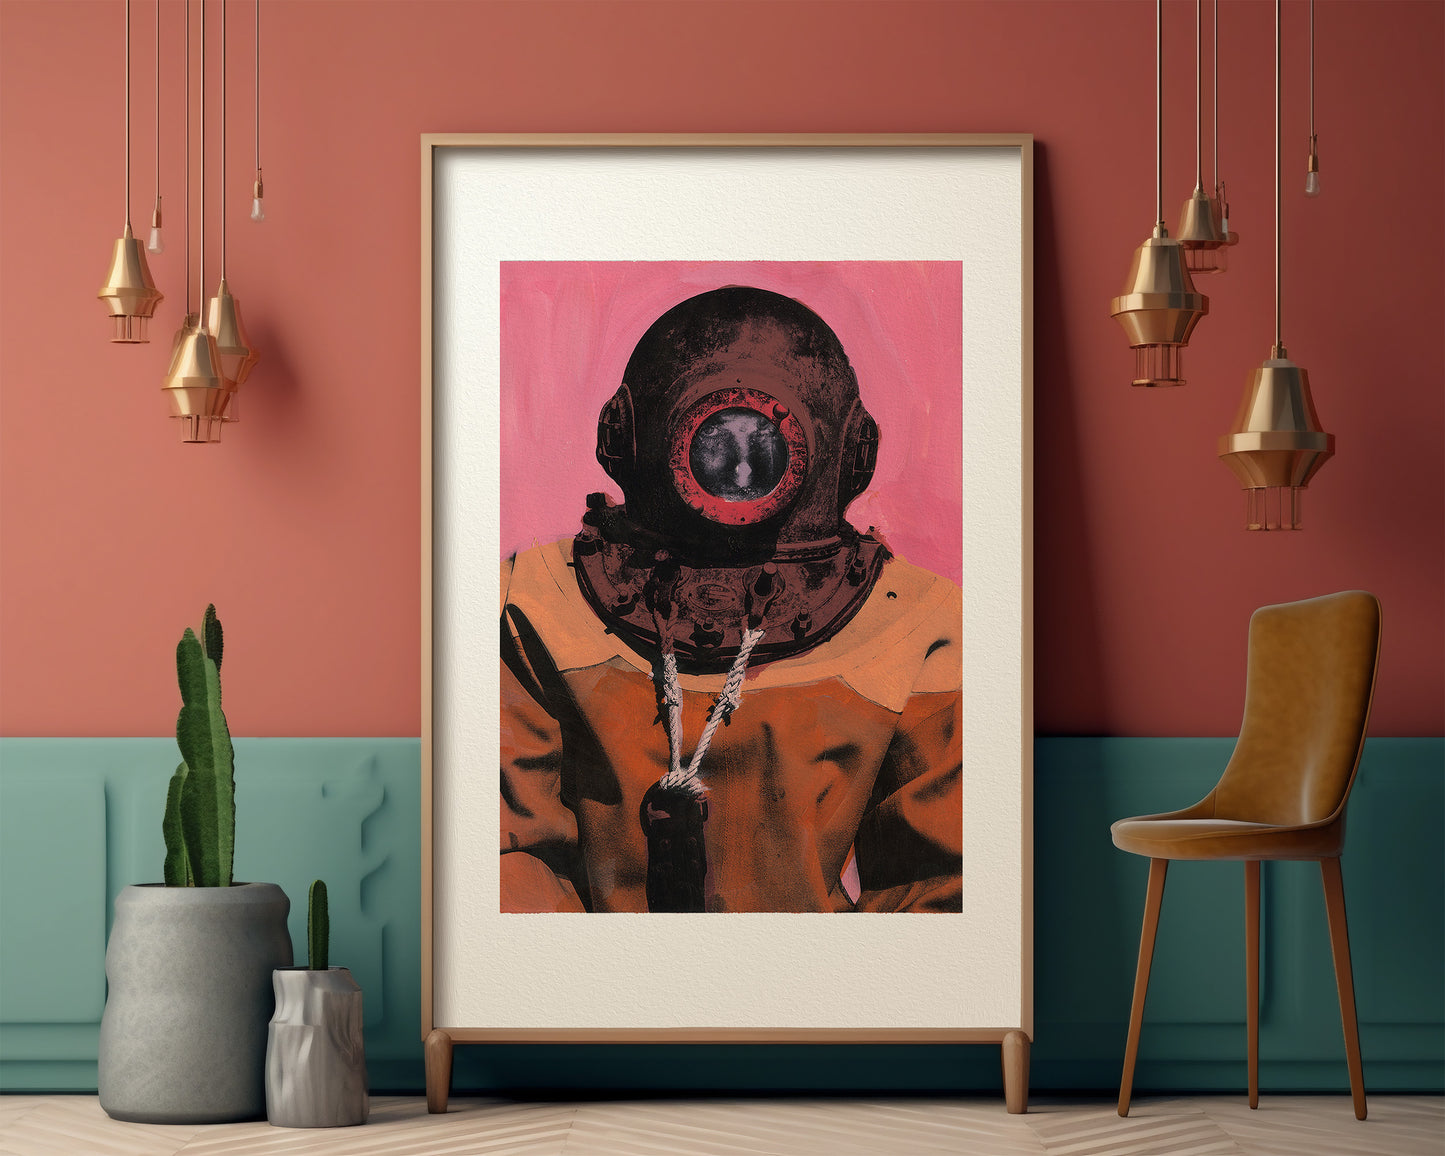 Painting Pop Art Wall Art from Greece | Flat Pink sponge diver from Kalymnos island, by George Tatakis - inside an eclectic room